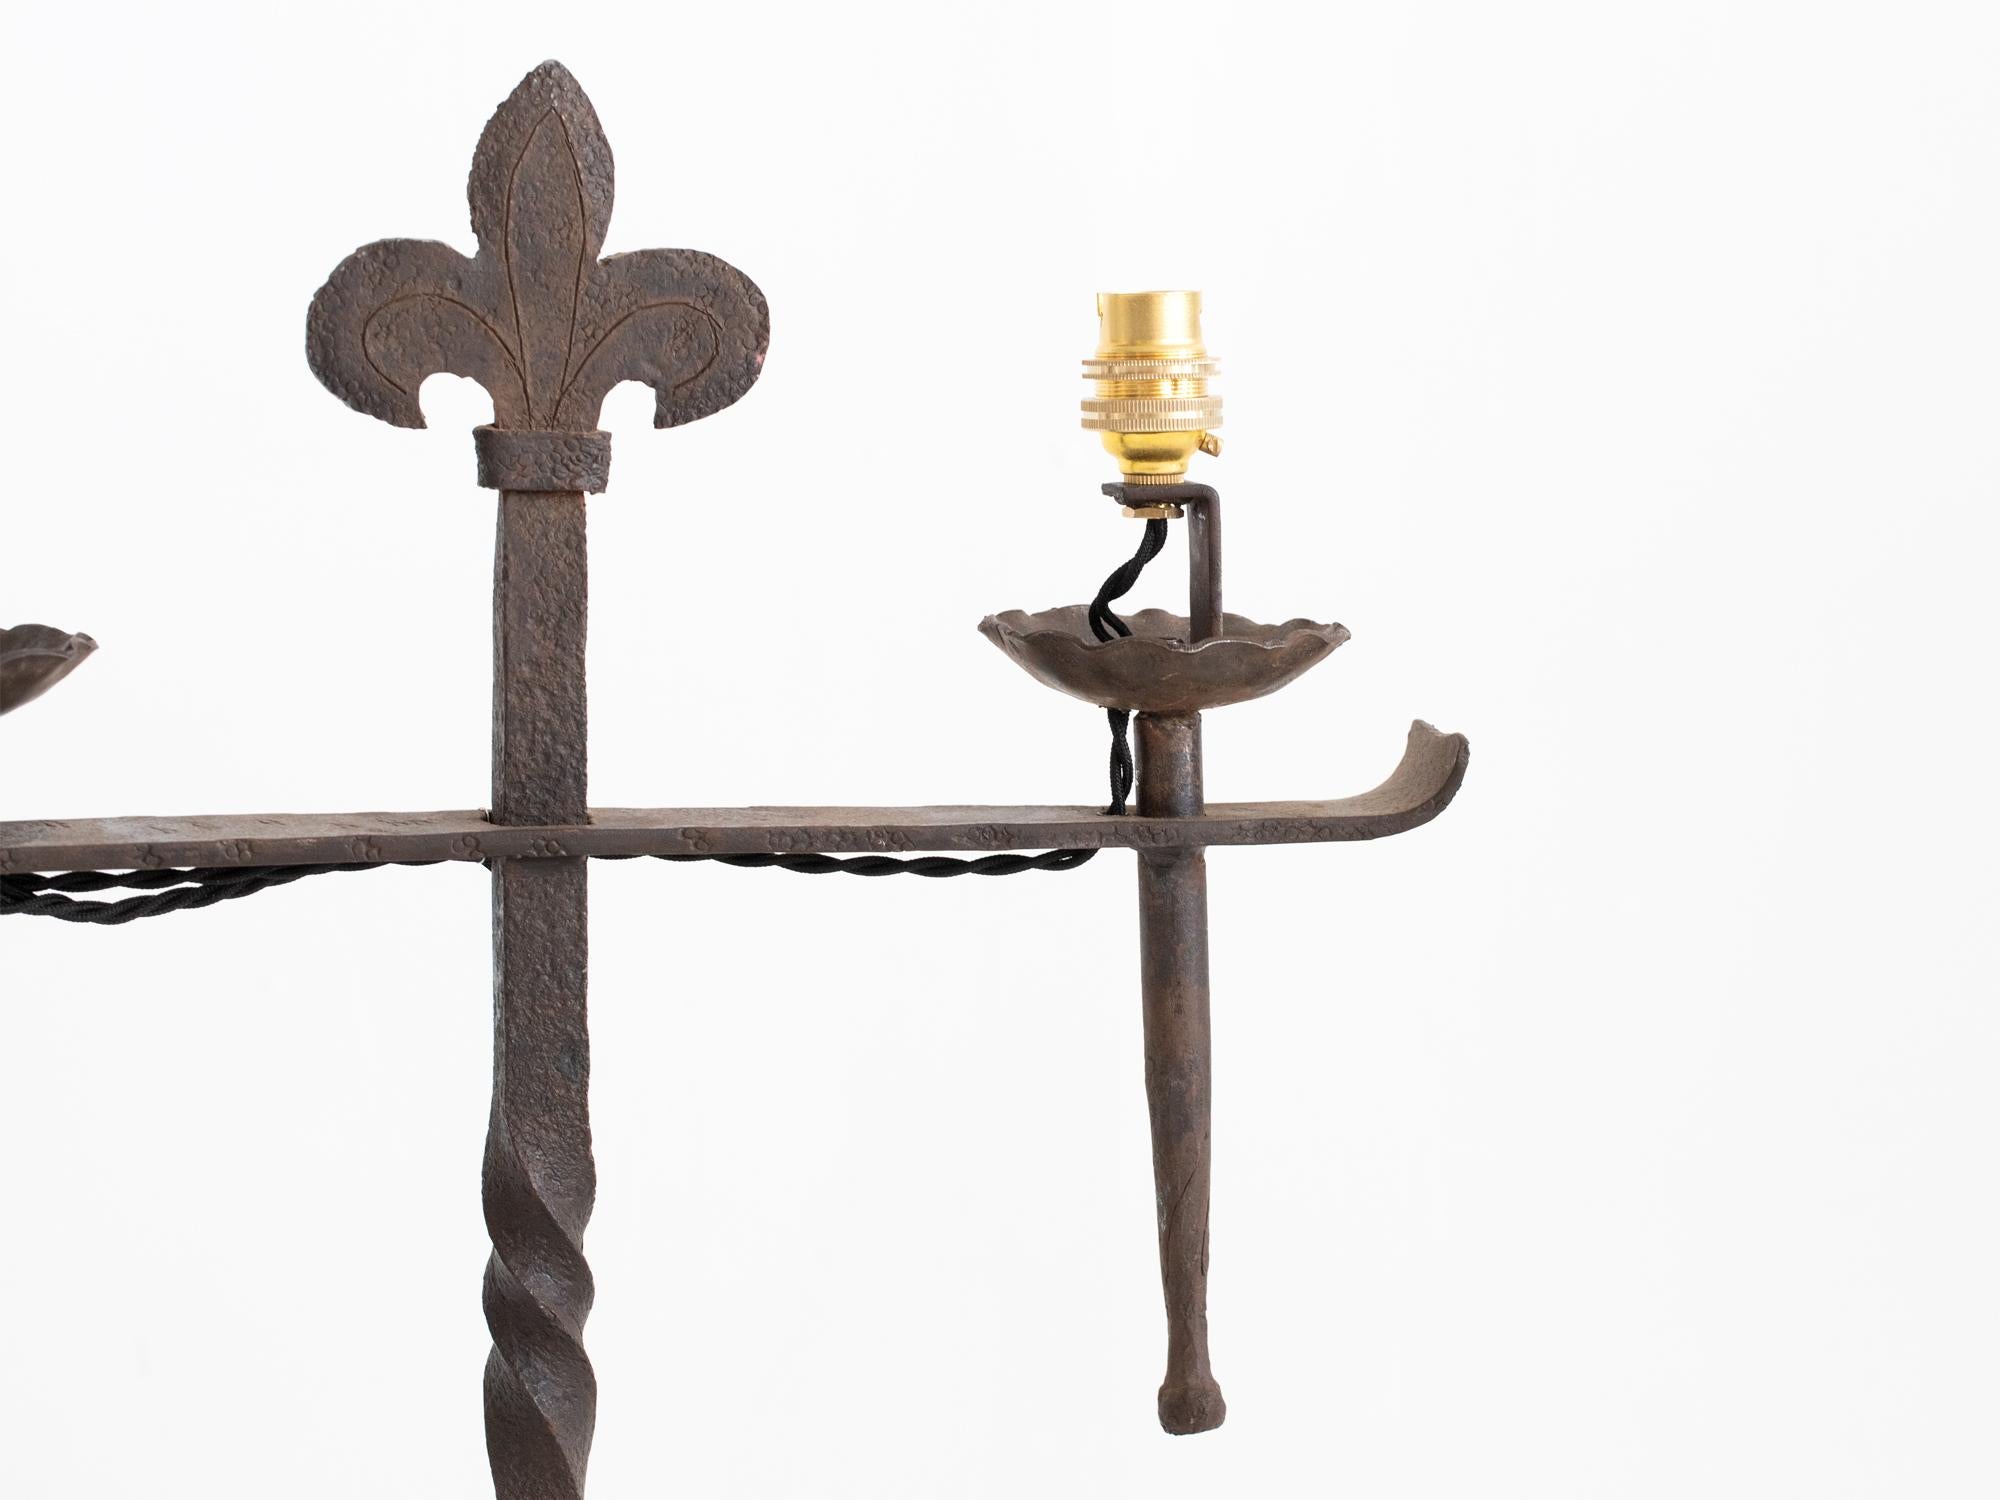 A pair of forged iron candlesticks converted to electricity. French, c. 1870.

Professionally re-wired.

Sold as a pair.

48.5 x 42 x 21 cm

19.1 x 16.5 x 8.3 